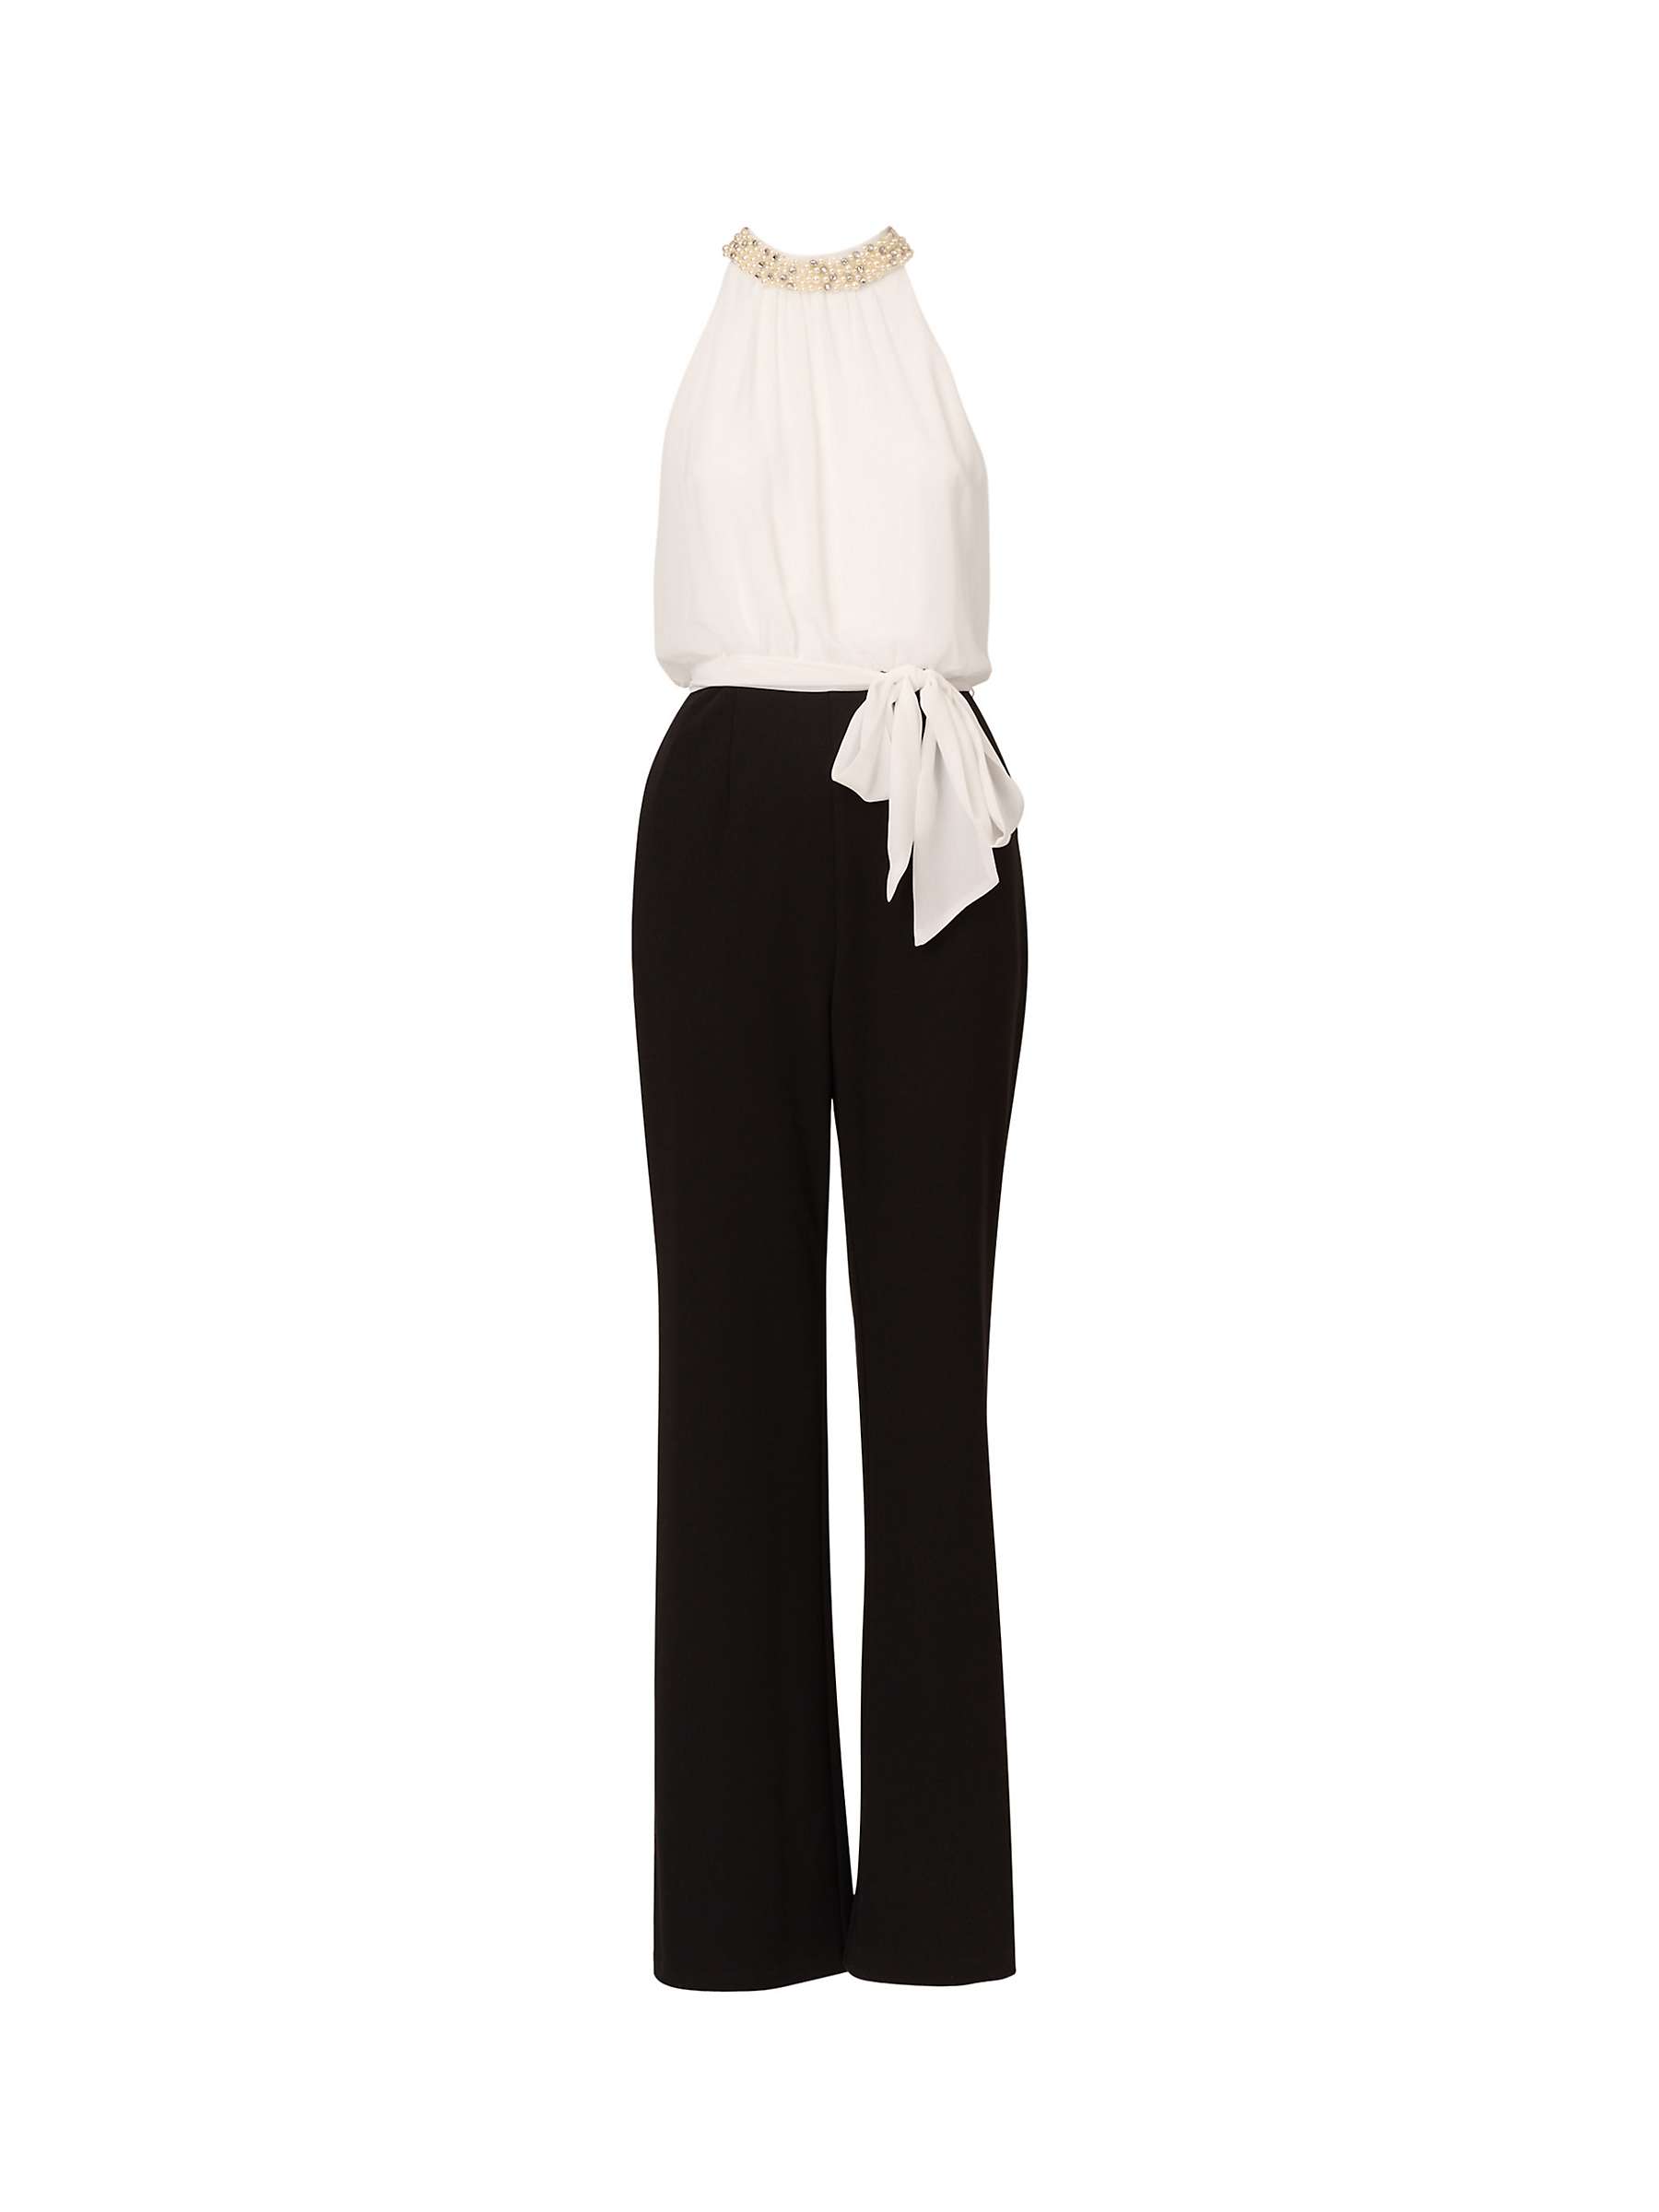 Buy Adrianna Papell Faux Pearl Chiffon Crepe Jumpsuit, Ivory/Black Online at johnlewis.com